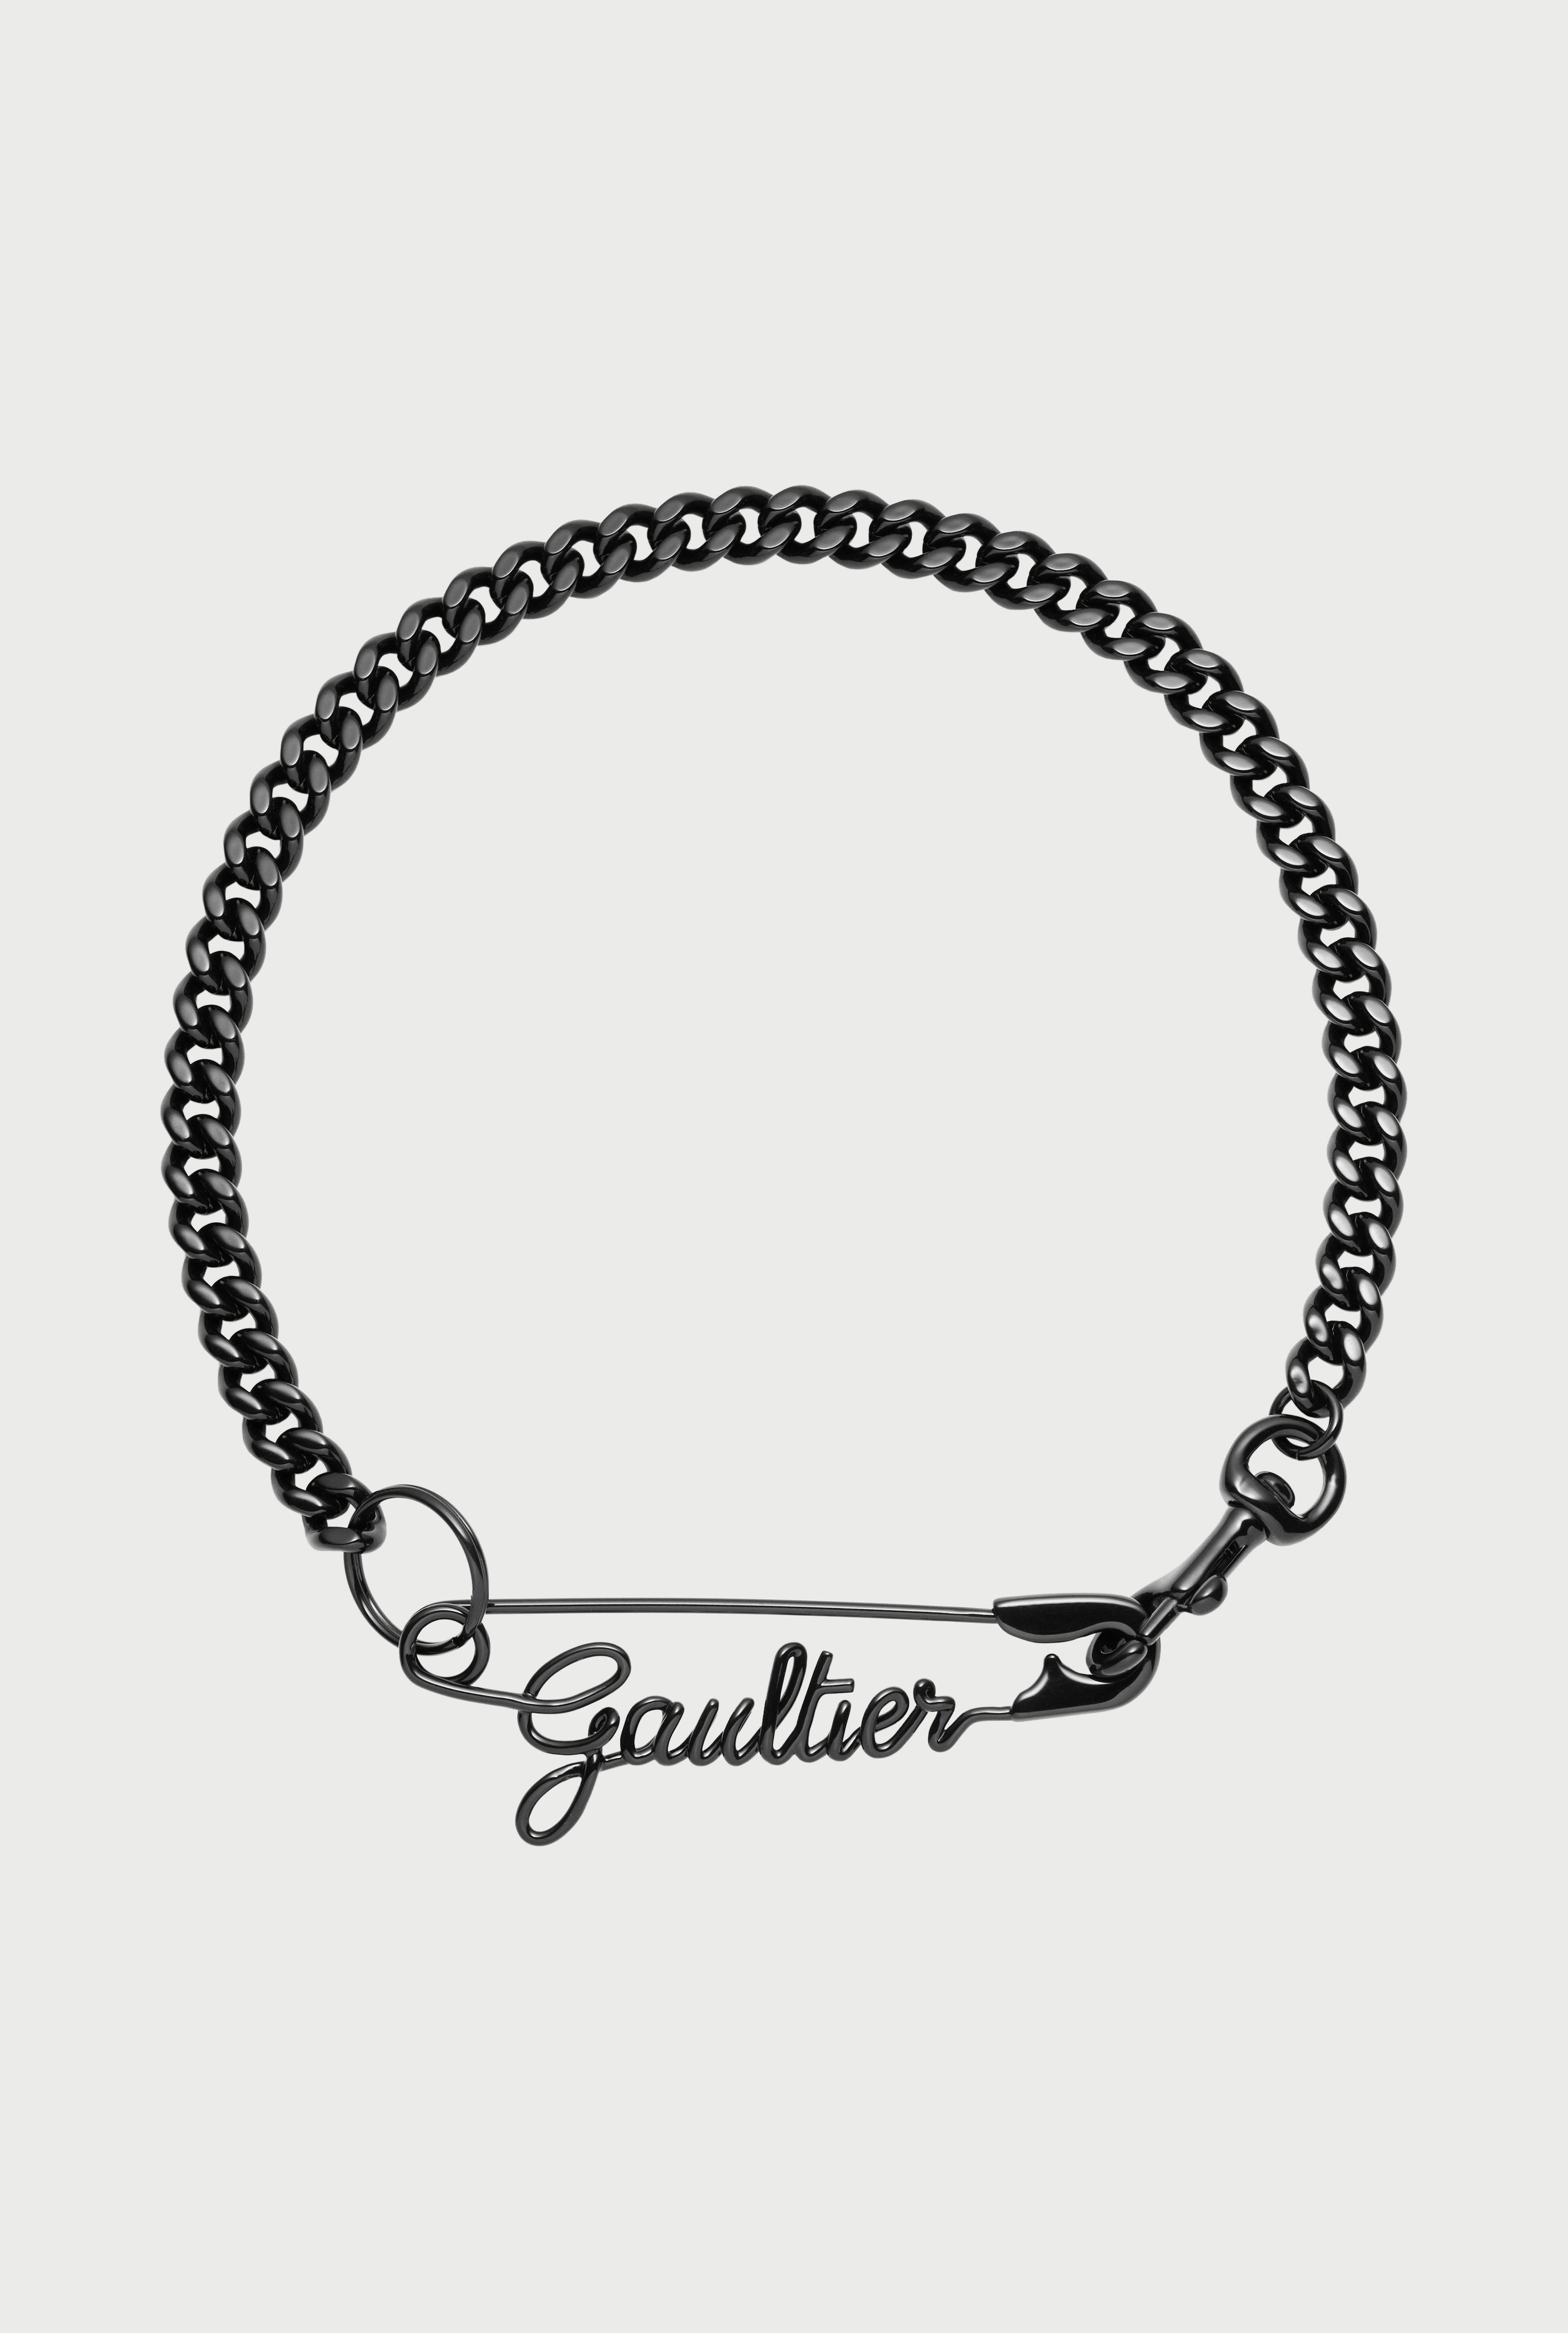 The Black Gaultier Safety Pin Necklace